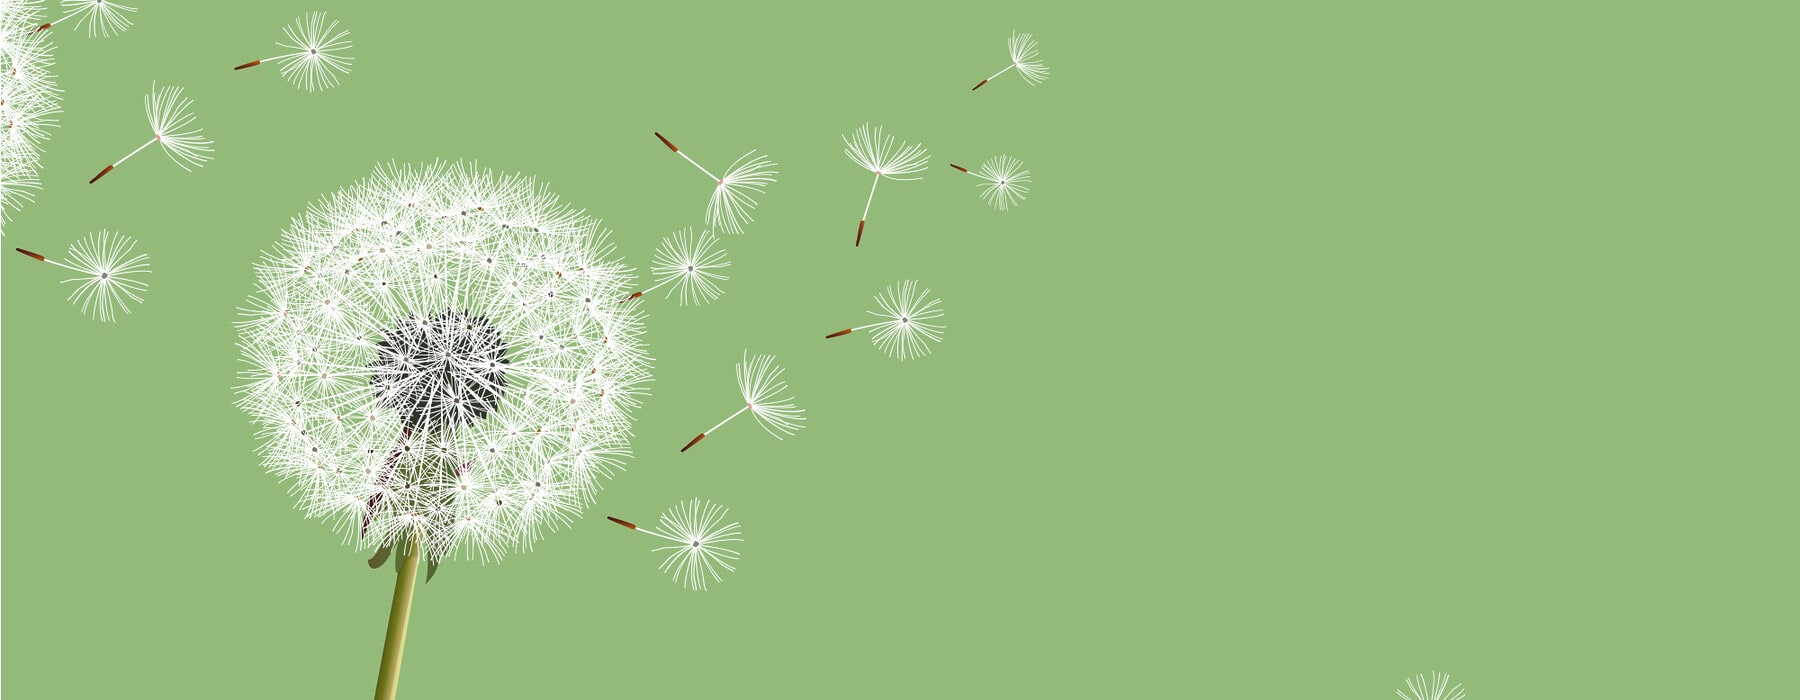 Dandelion blowing in the air against green background